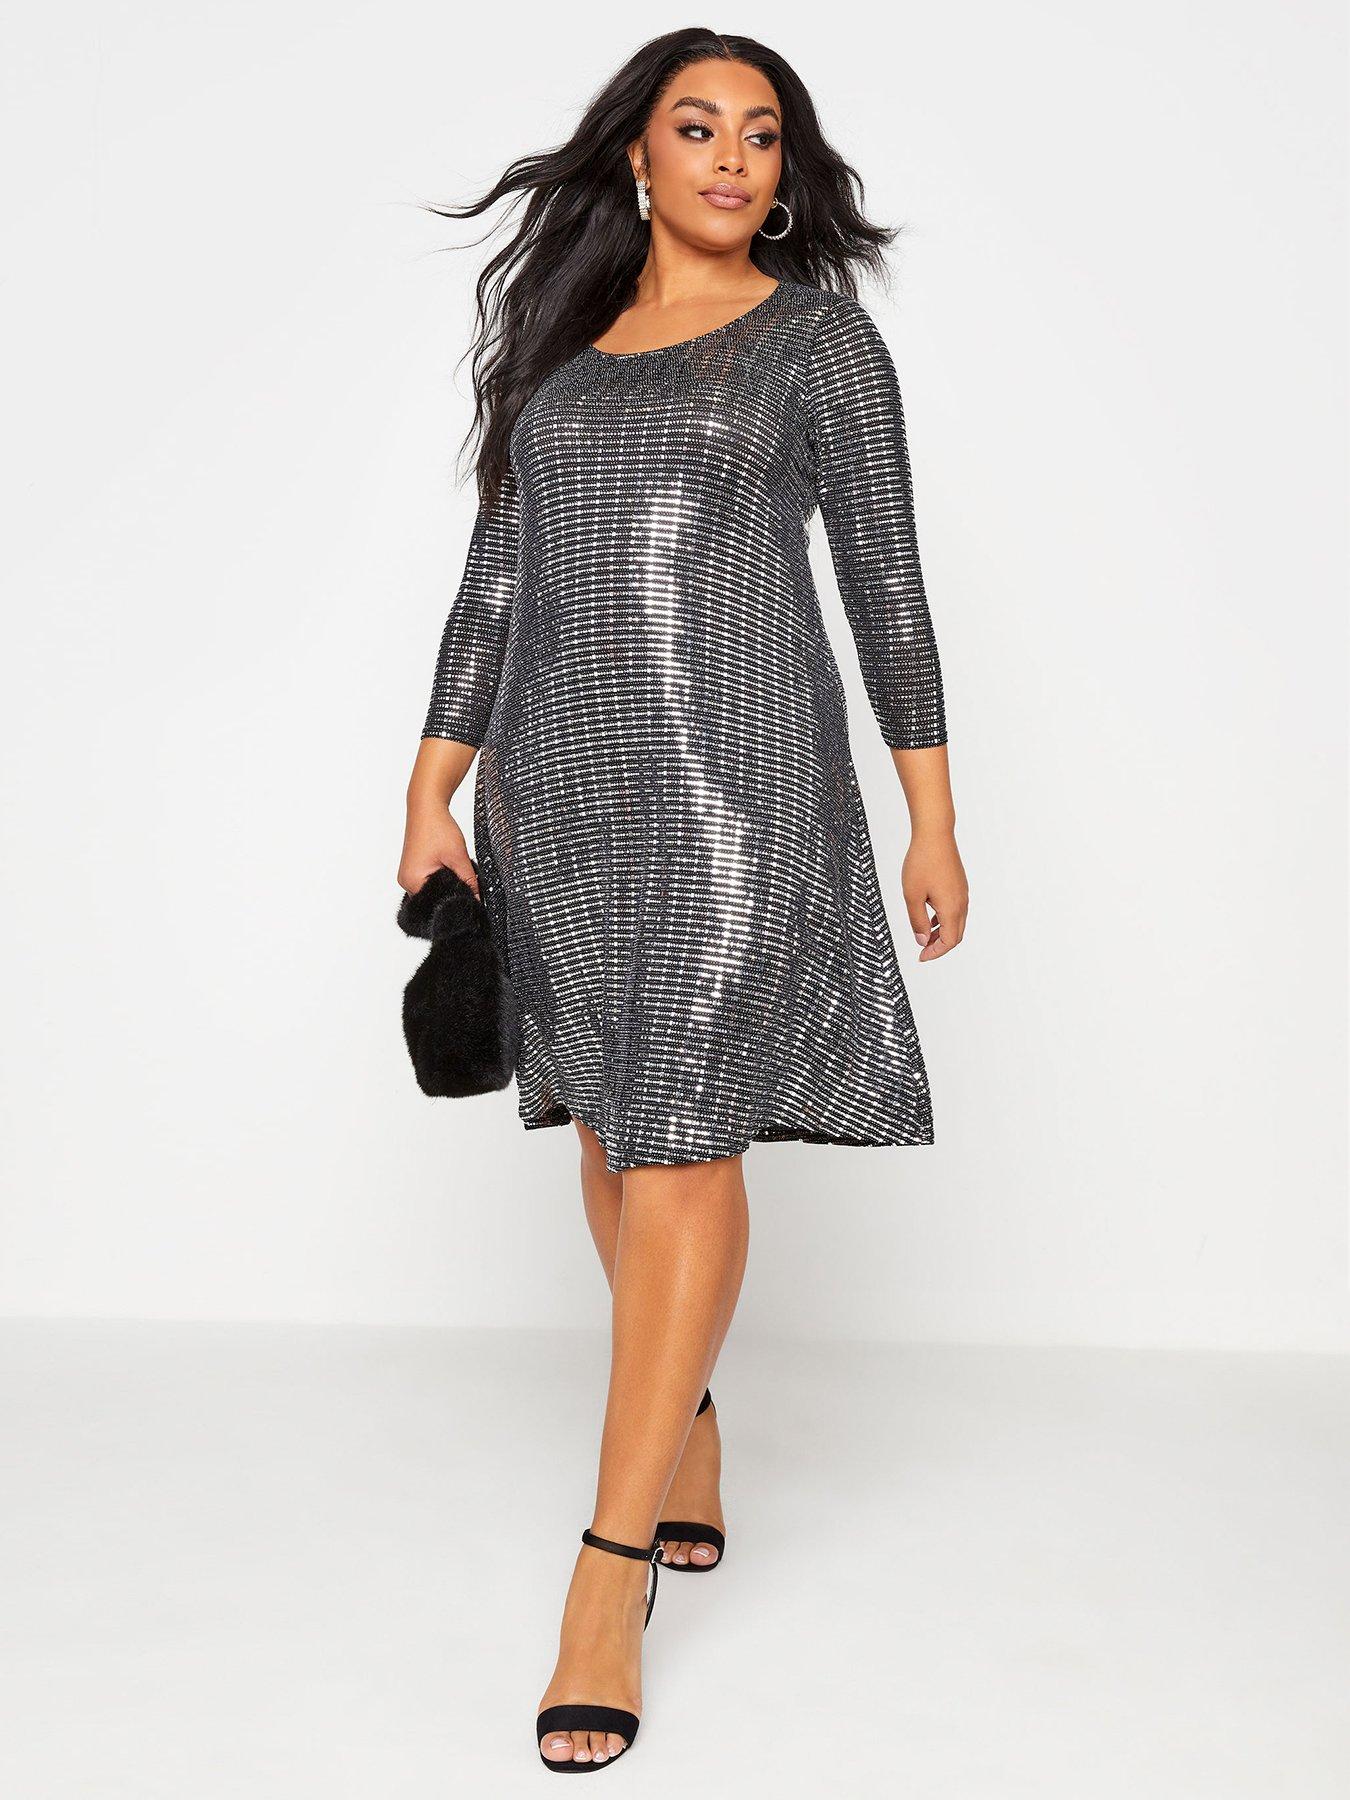 Dresses Yours London Three Quarter Sleeve Sequin Party Swing Dress - Silver